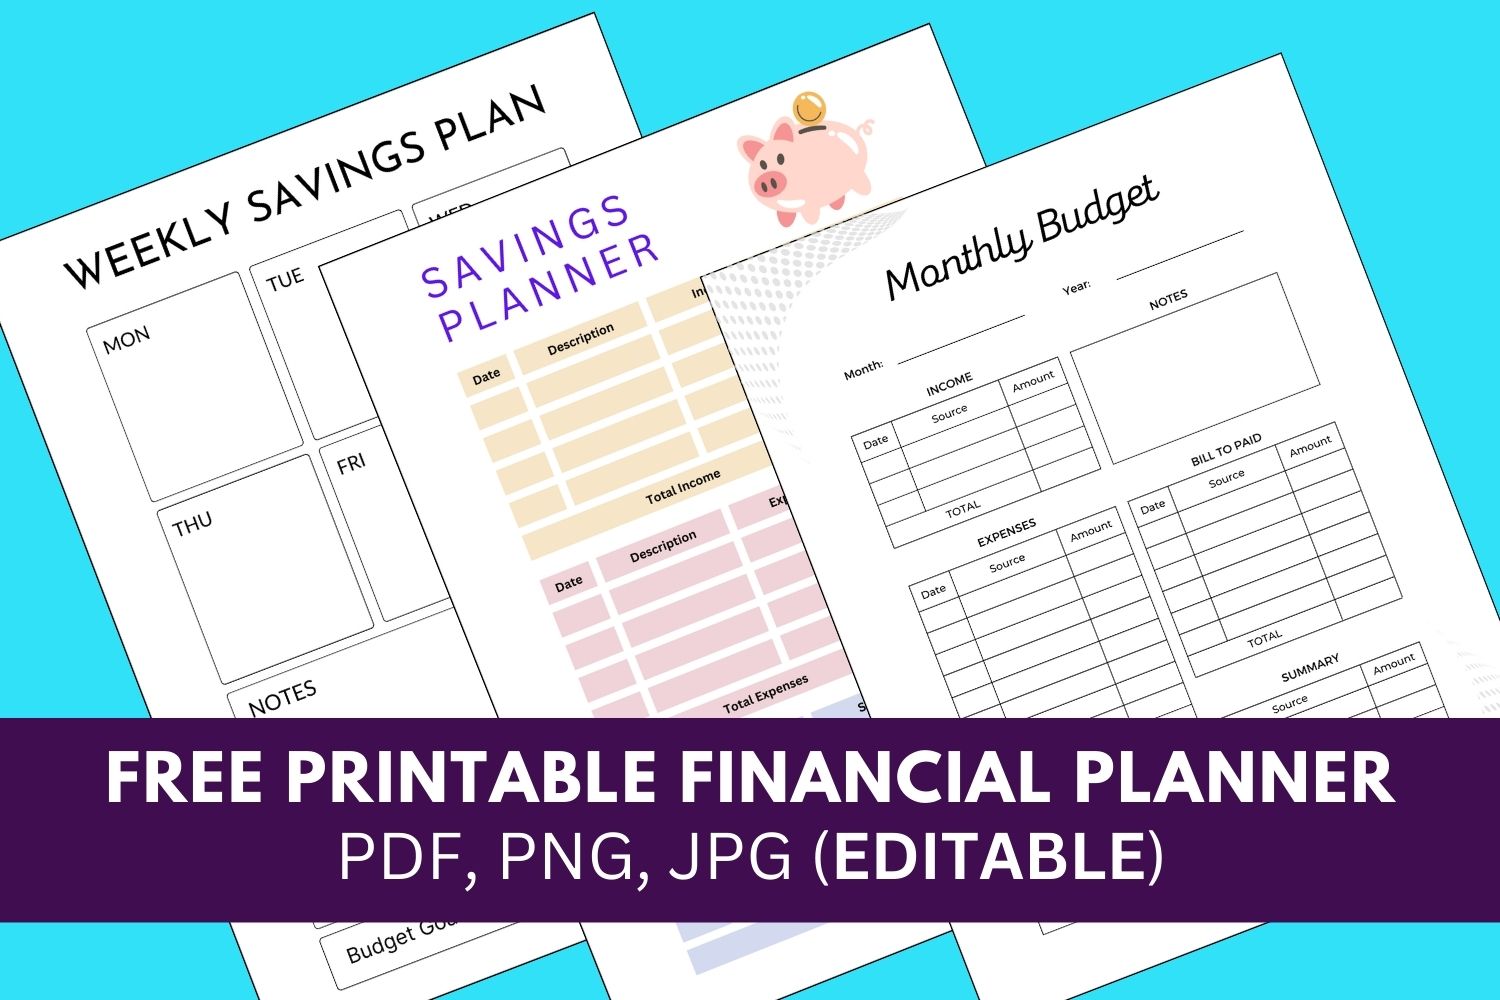 Financial planner template, Weekly Savings planner, Monthly Budget, Yearly budget,  Printable financial Planner, finance planner, weekly, monthly, yearly,  budget template, printable, free, pdf, notes, print, download, online, simple, school, college, office